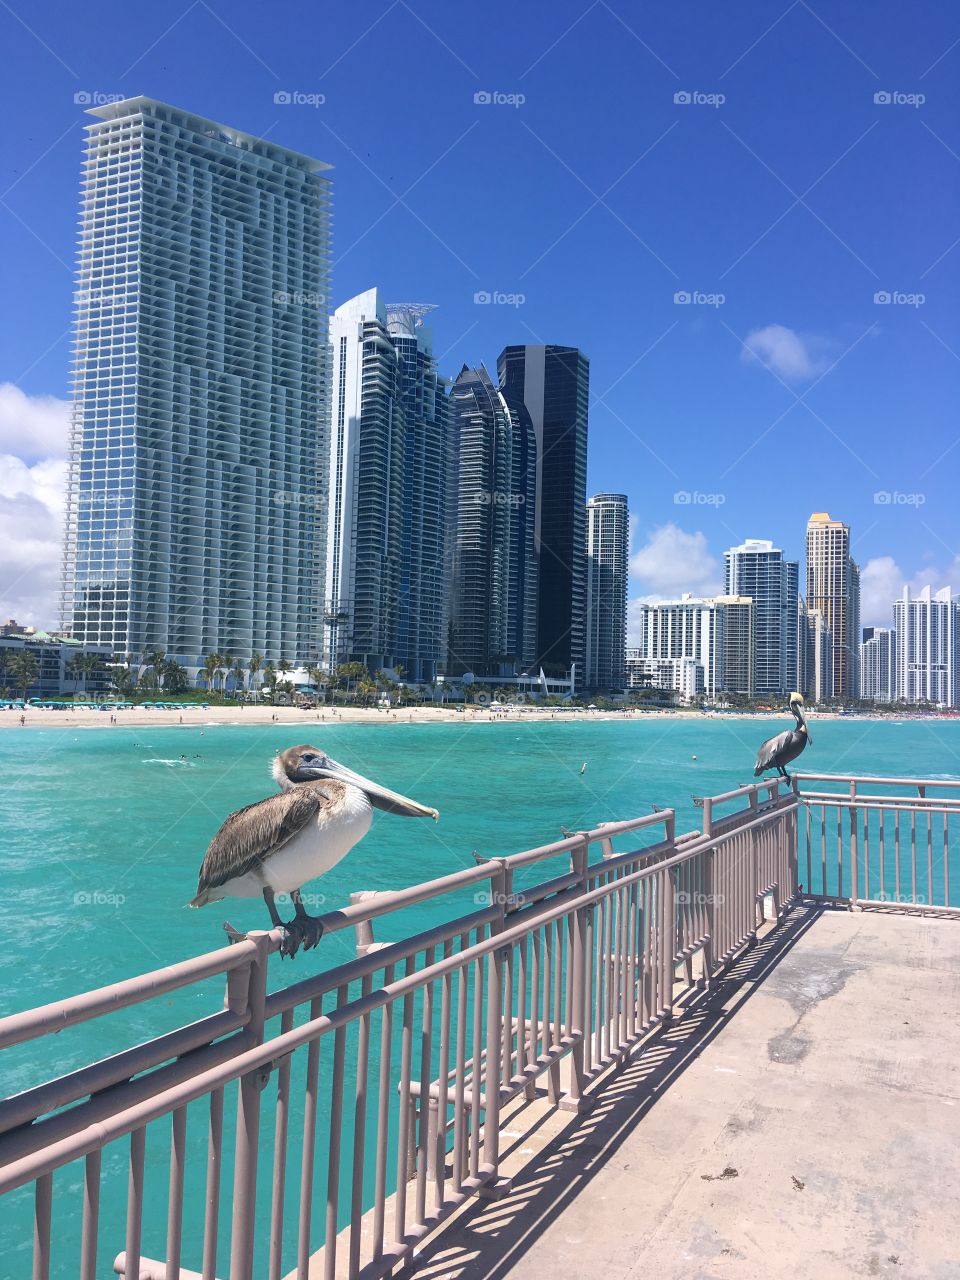 The beautiful turquoise waters of sunny isles, dramatically overlooked by the man made structures of modern day living!